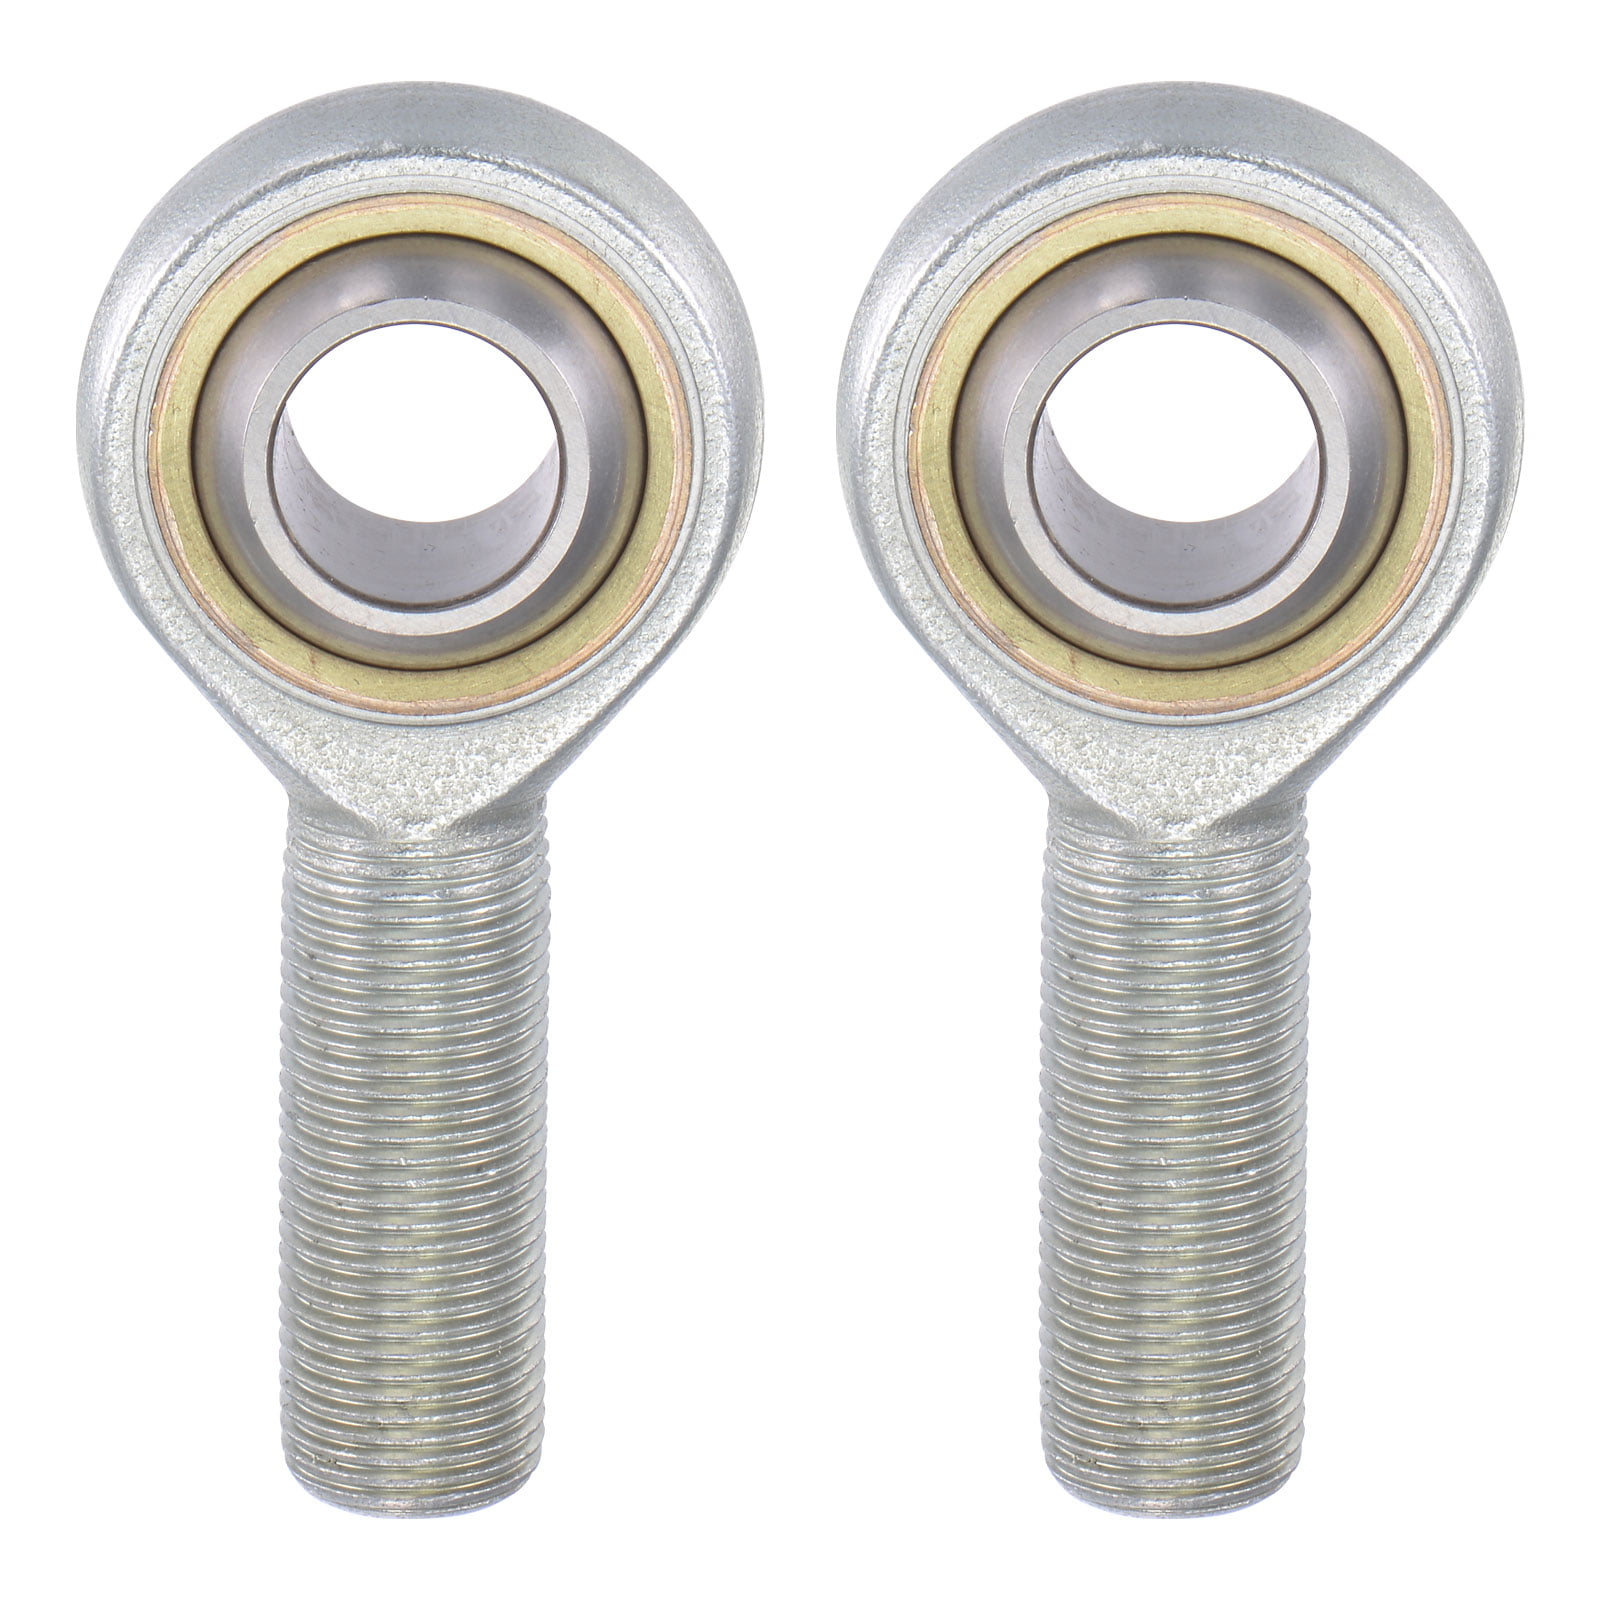 Details about   Joint Bearing Male Left Male Threaded Assembly Self‑Lubricating Rod End SAL18T/K 